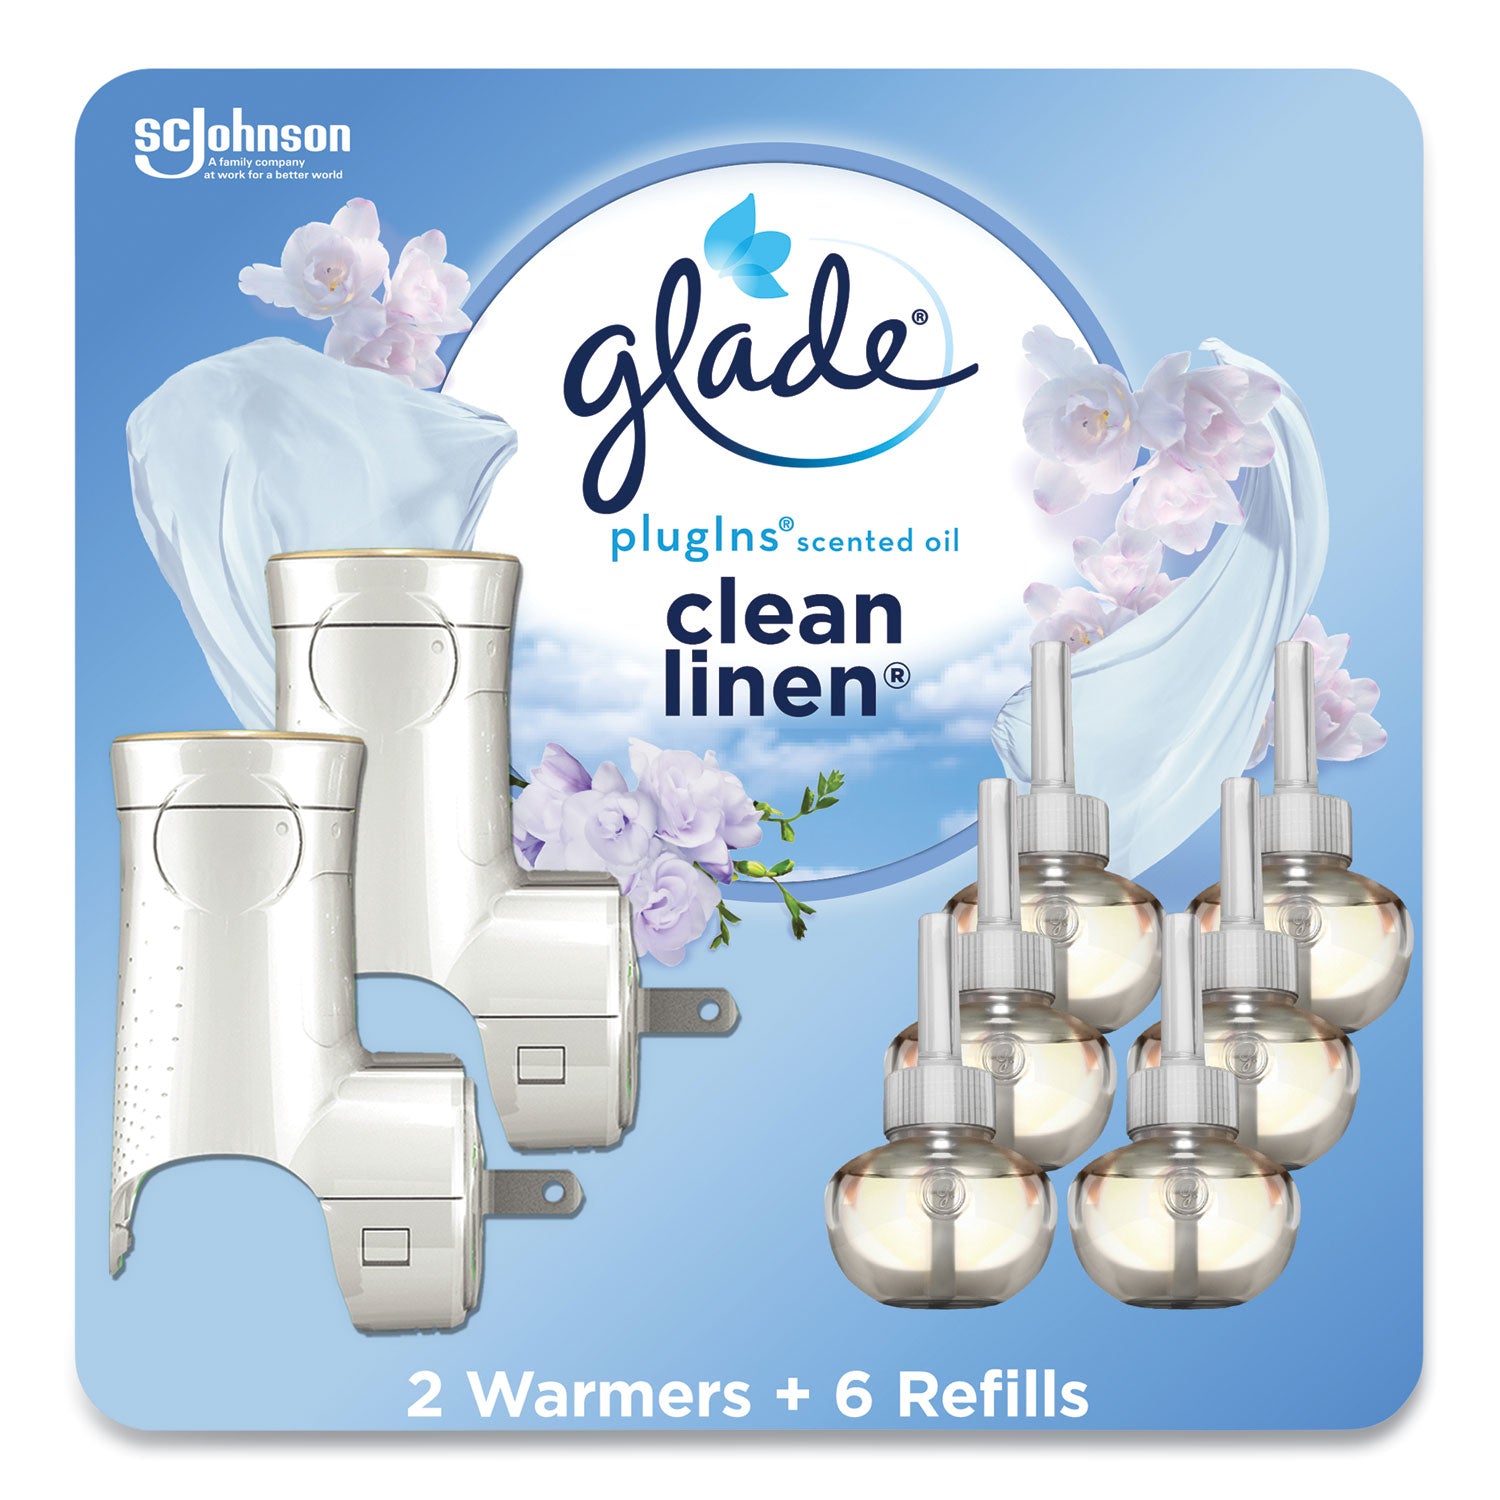 plugin-scented-oil-clean-linen-067-oz-2-warmers-and-6-refills-pack_sjn319963 - 2